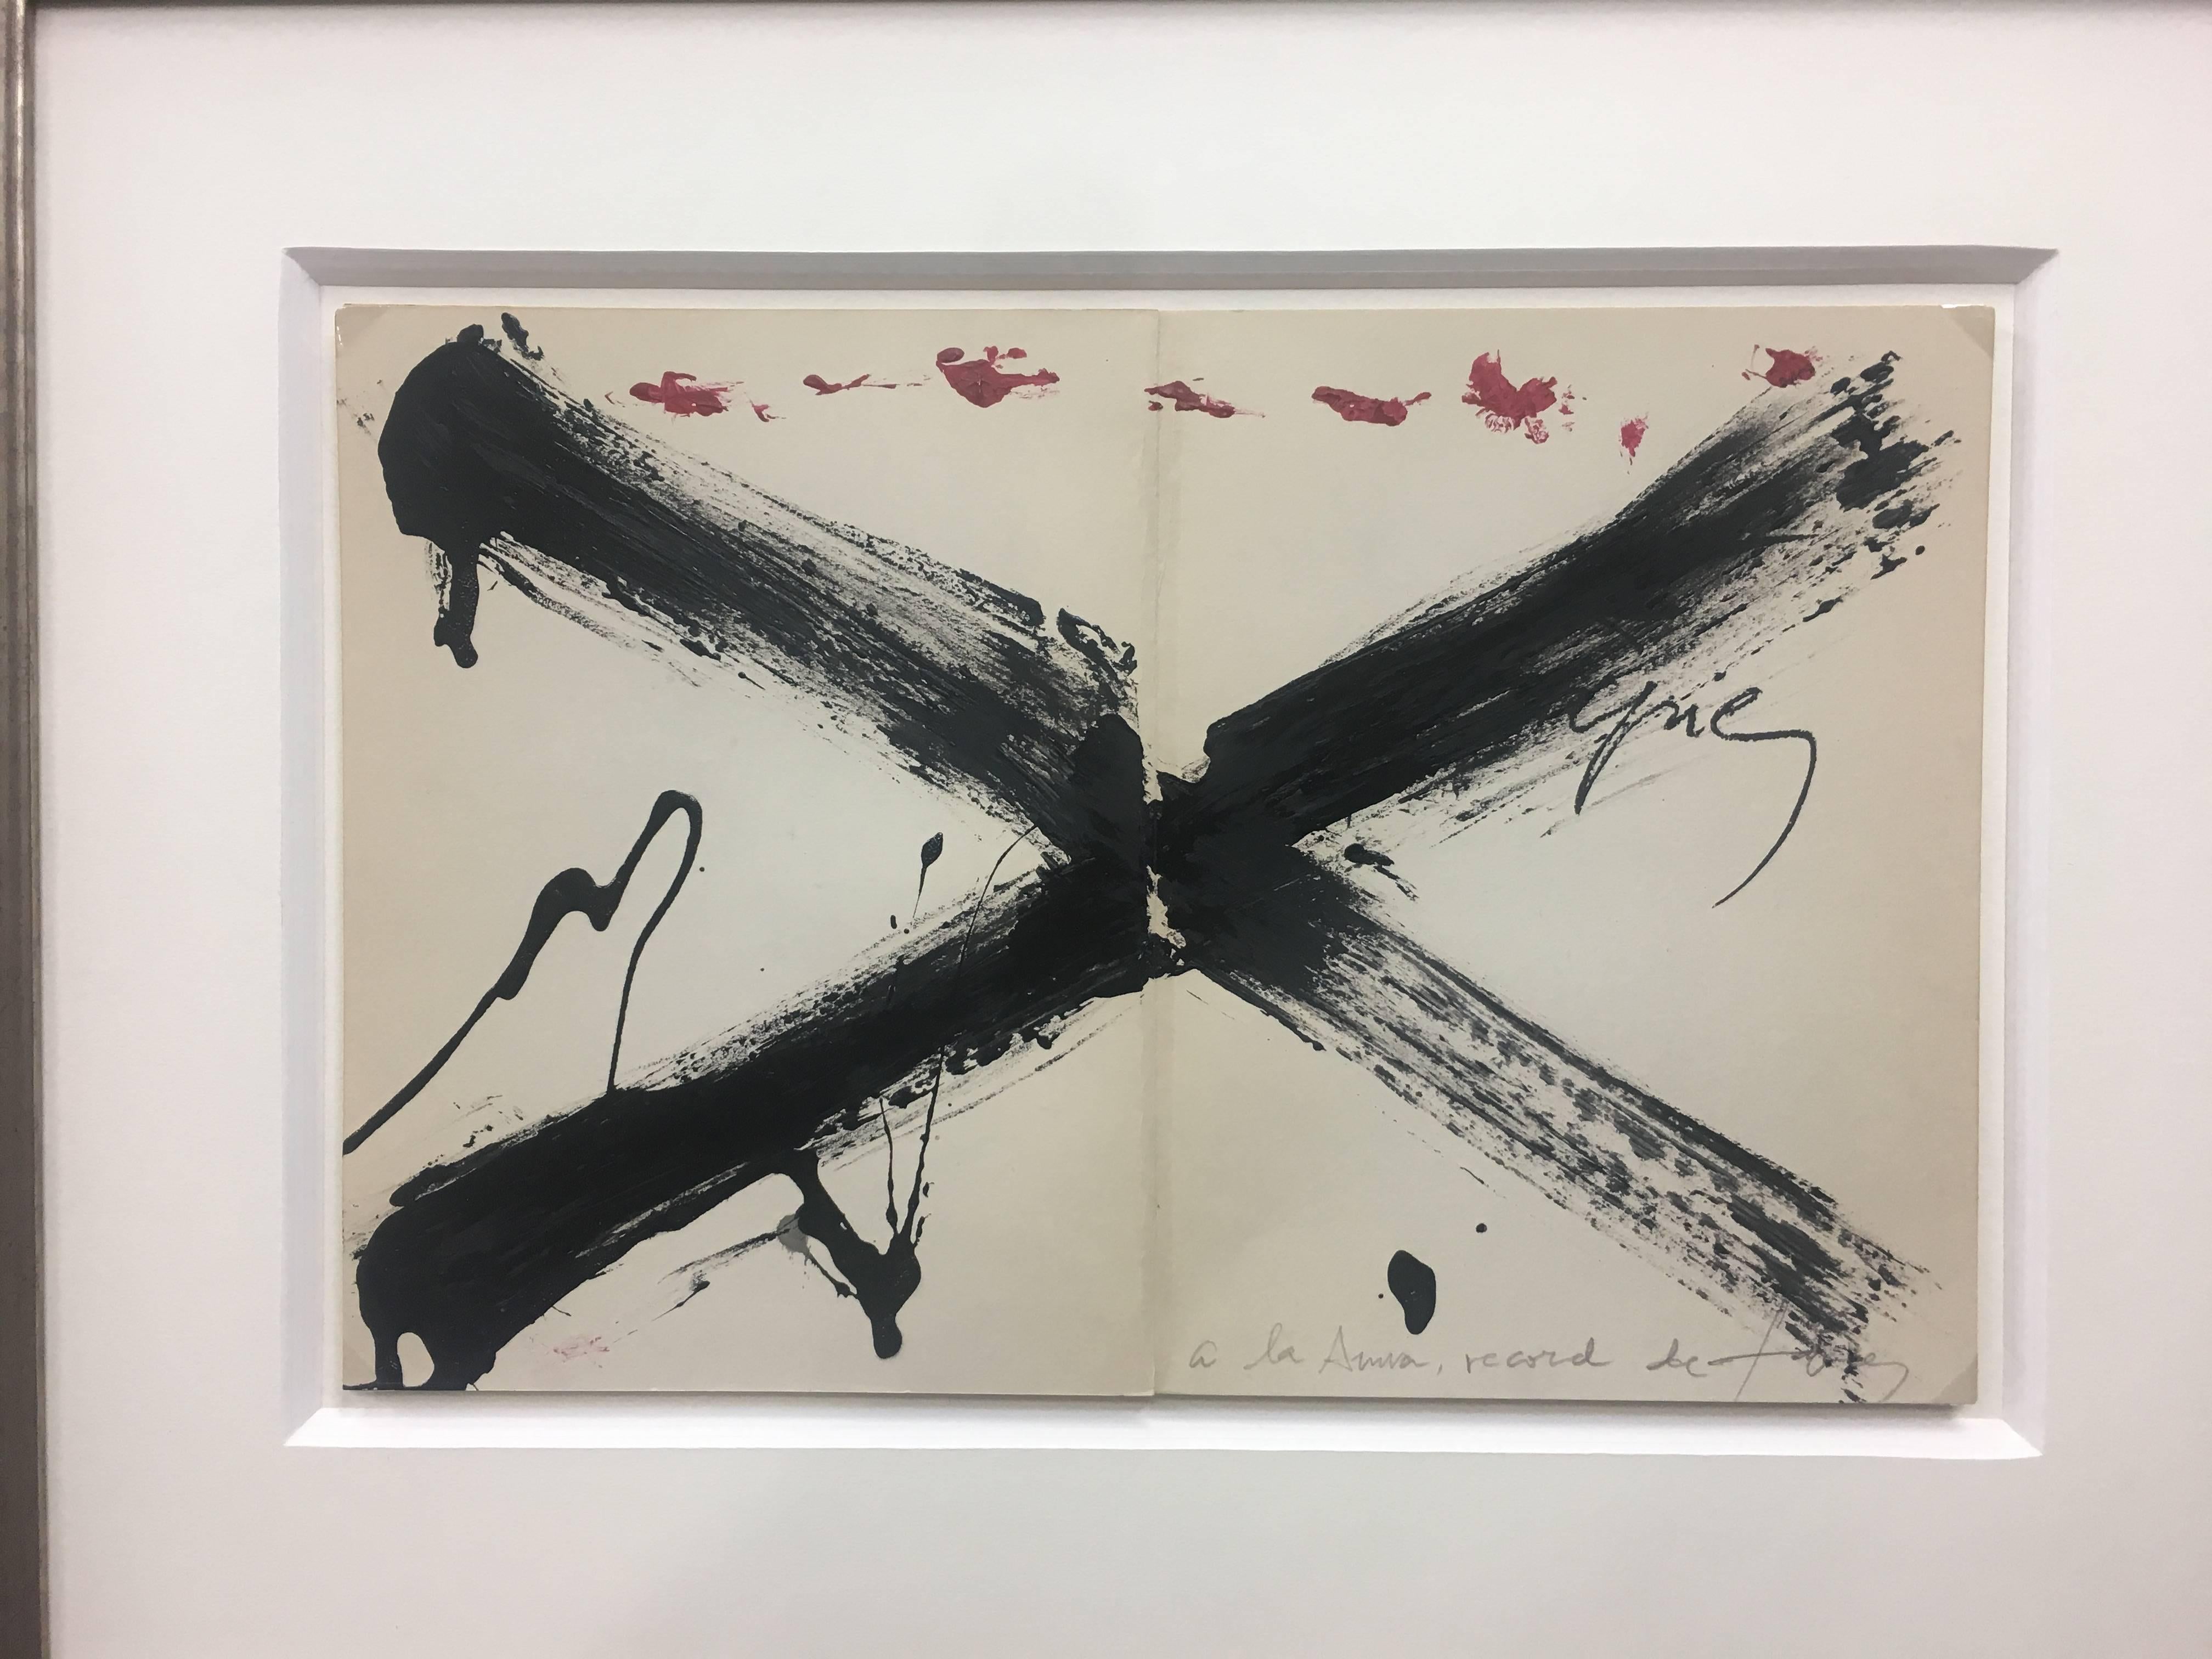 ANTONI TAPIES was the maximum representative of Spanish abstract art of the 20th century. His works are represented in museums and foundations around the world.

Tàpies
Antoni Tàpies Puig
(Barcelona 1923 - 2012)
“ CREU ”
1977
Original
Acrylic on